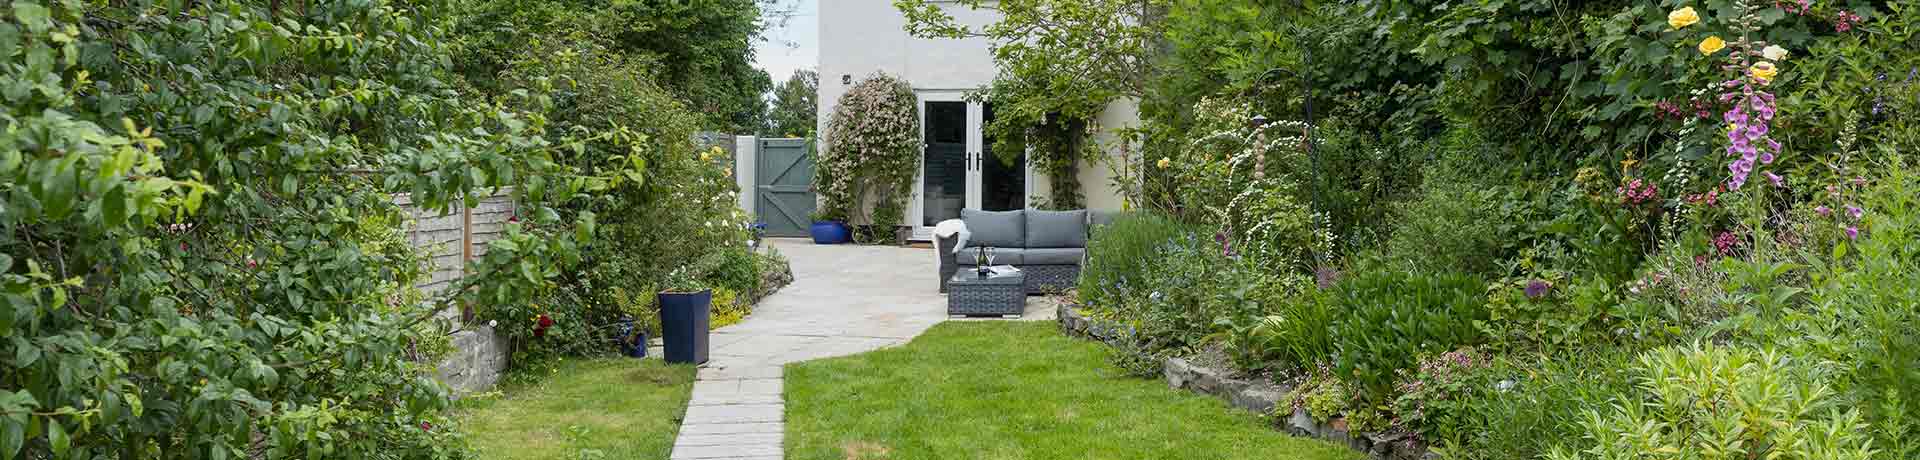 Dog friendly cottages in South West with an enclosed garden.